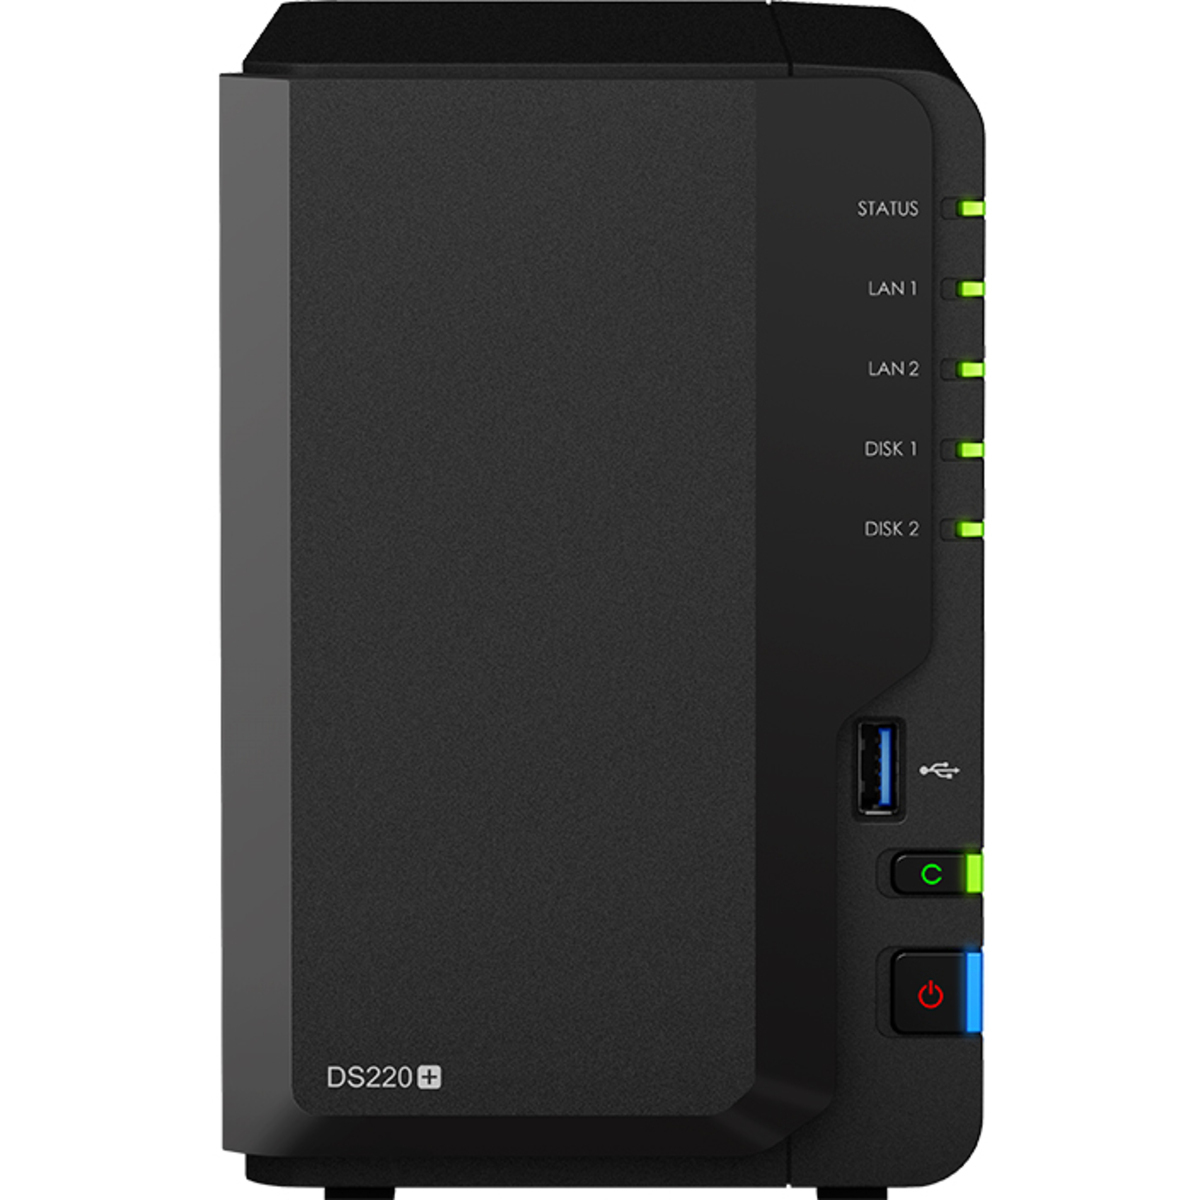 buy $1289 Synology DiskStation DS220+ 36tb Desktop NAS - Network Attached Storage Device 2x18000gb Toshiba Enterprise Capacity MG09ACA18TE 3.5 7200rpm SATA 6Gb/s HDD ENTERPRISE Class Drives Installed - Burn-In Tested - FREE RAM UPGRADE - nas headquarters buy network attached storage server device das new raid-5 free shipping usa christmas new year holiday sale DiskStation DS220+